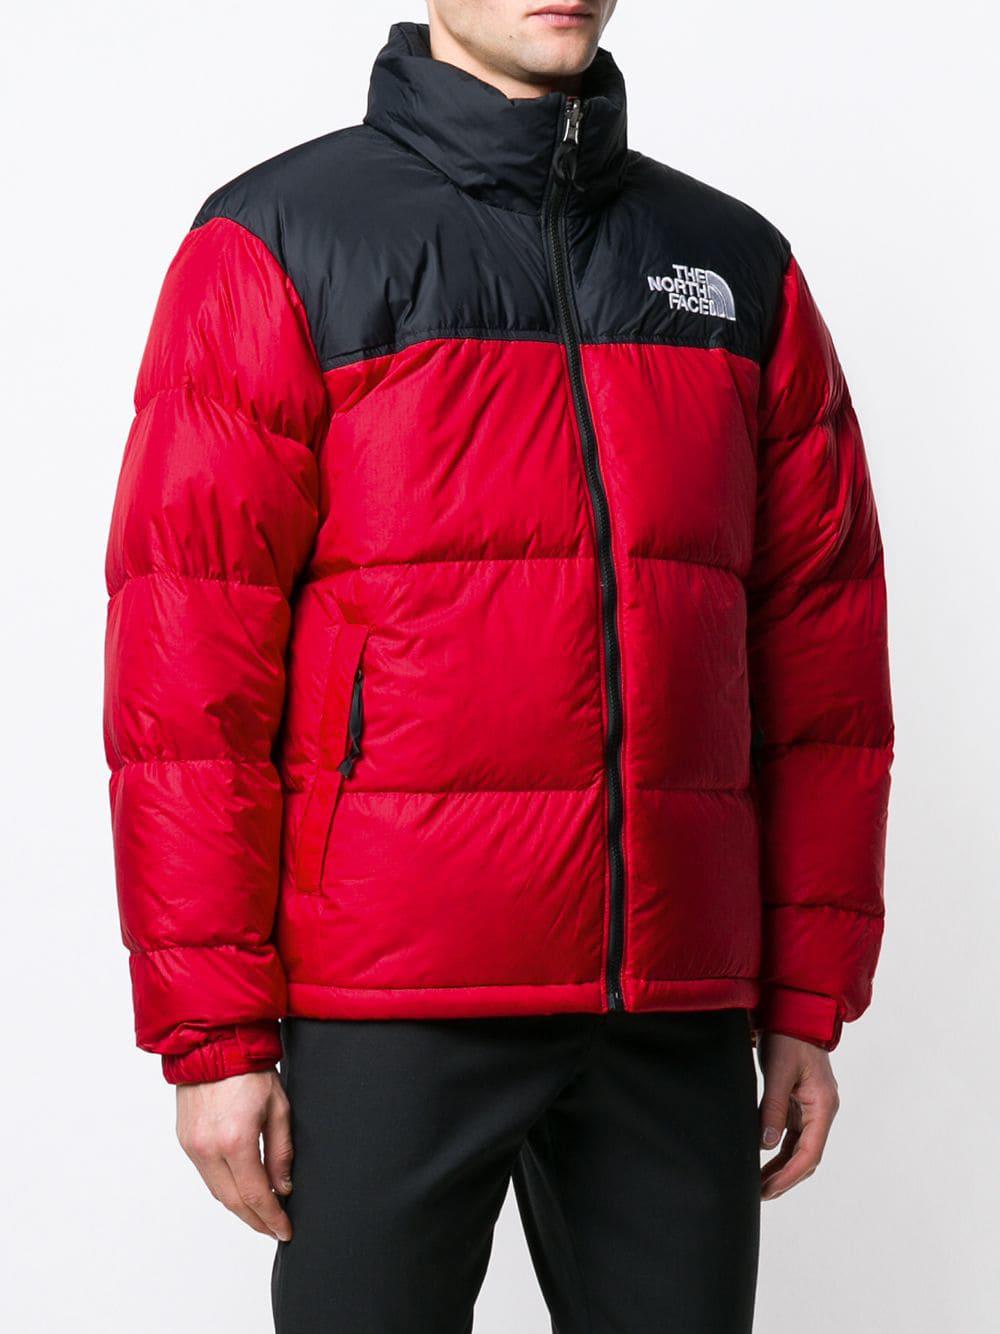 Boys Red North Face Jacket Clearance Wholesale, 68% OFF |  zoomphotobooths.com